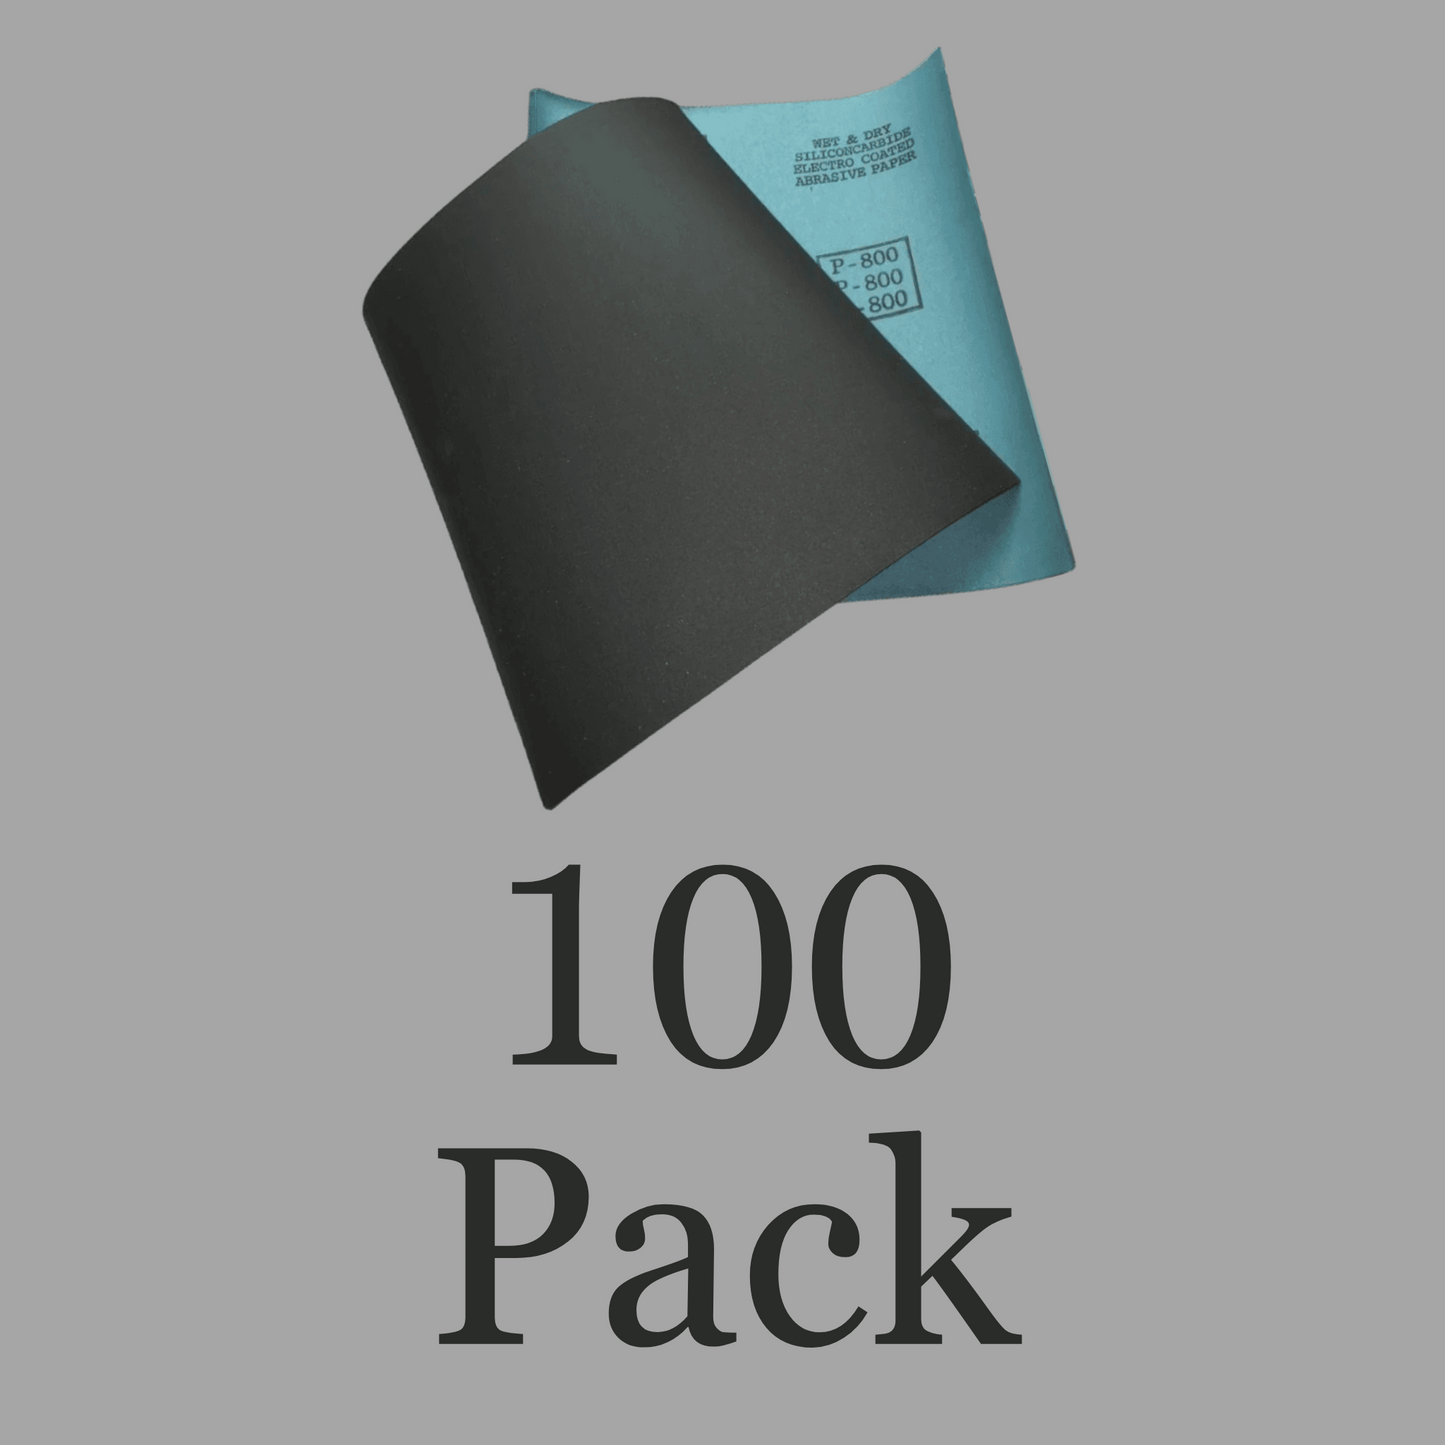 100 Pack Silicon Carbide Wet/Dry Sheets